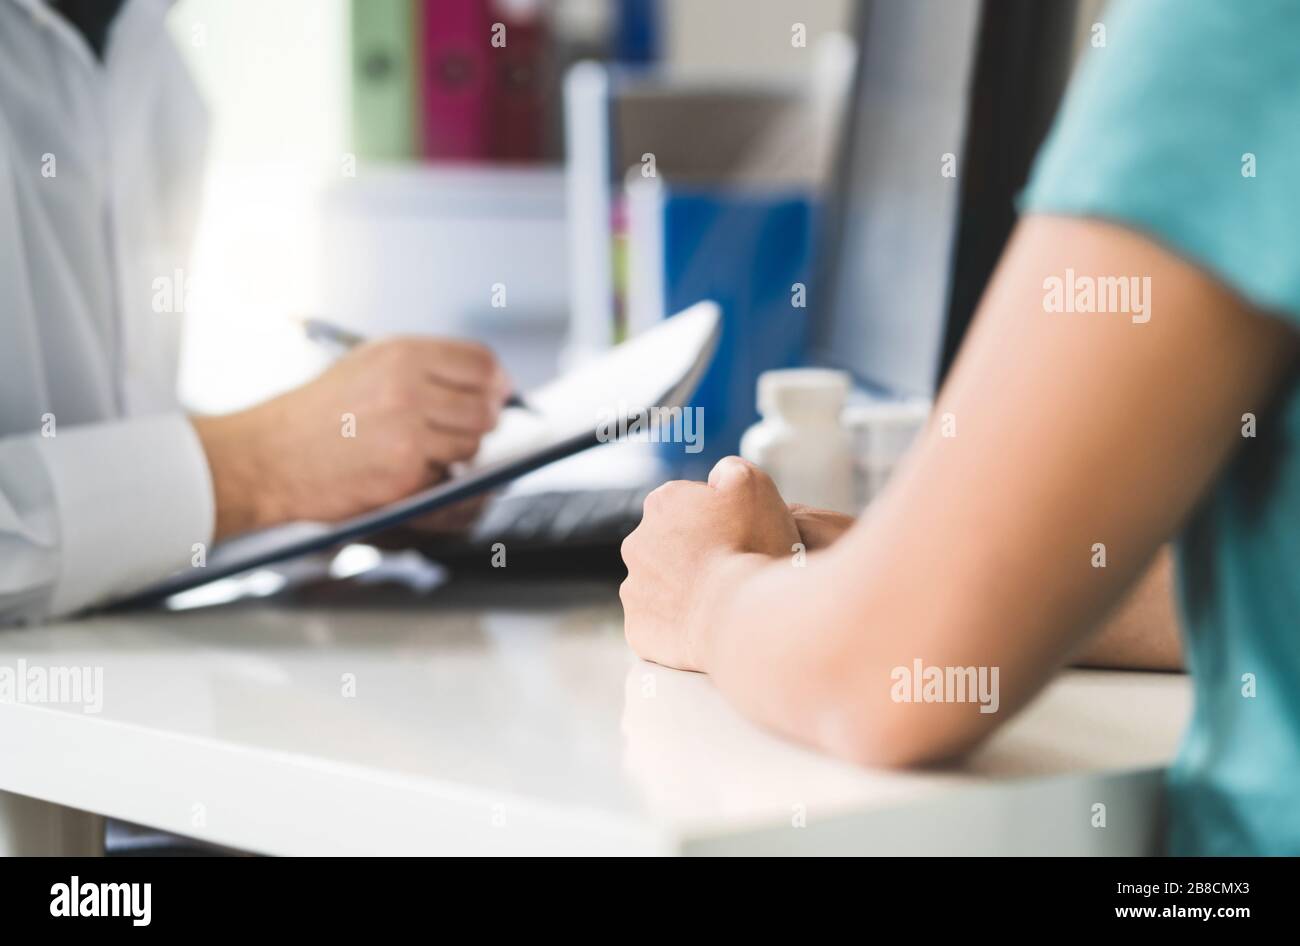 Sick patient visiting doctor in health care center or emergency room. Woman in appointment and meeting with physician or nurse. Stock Photo